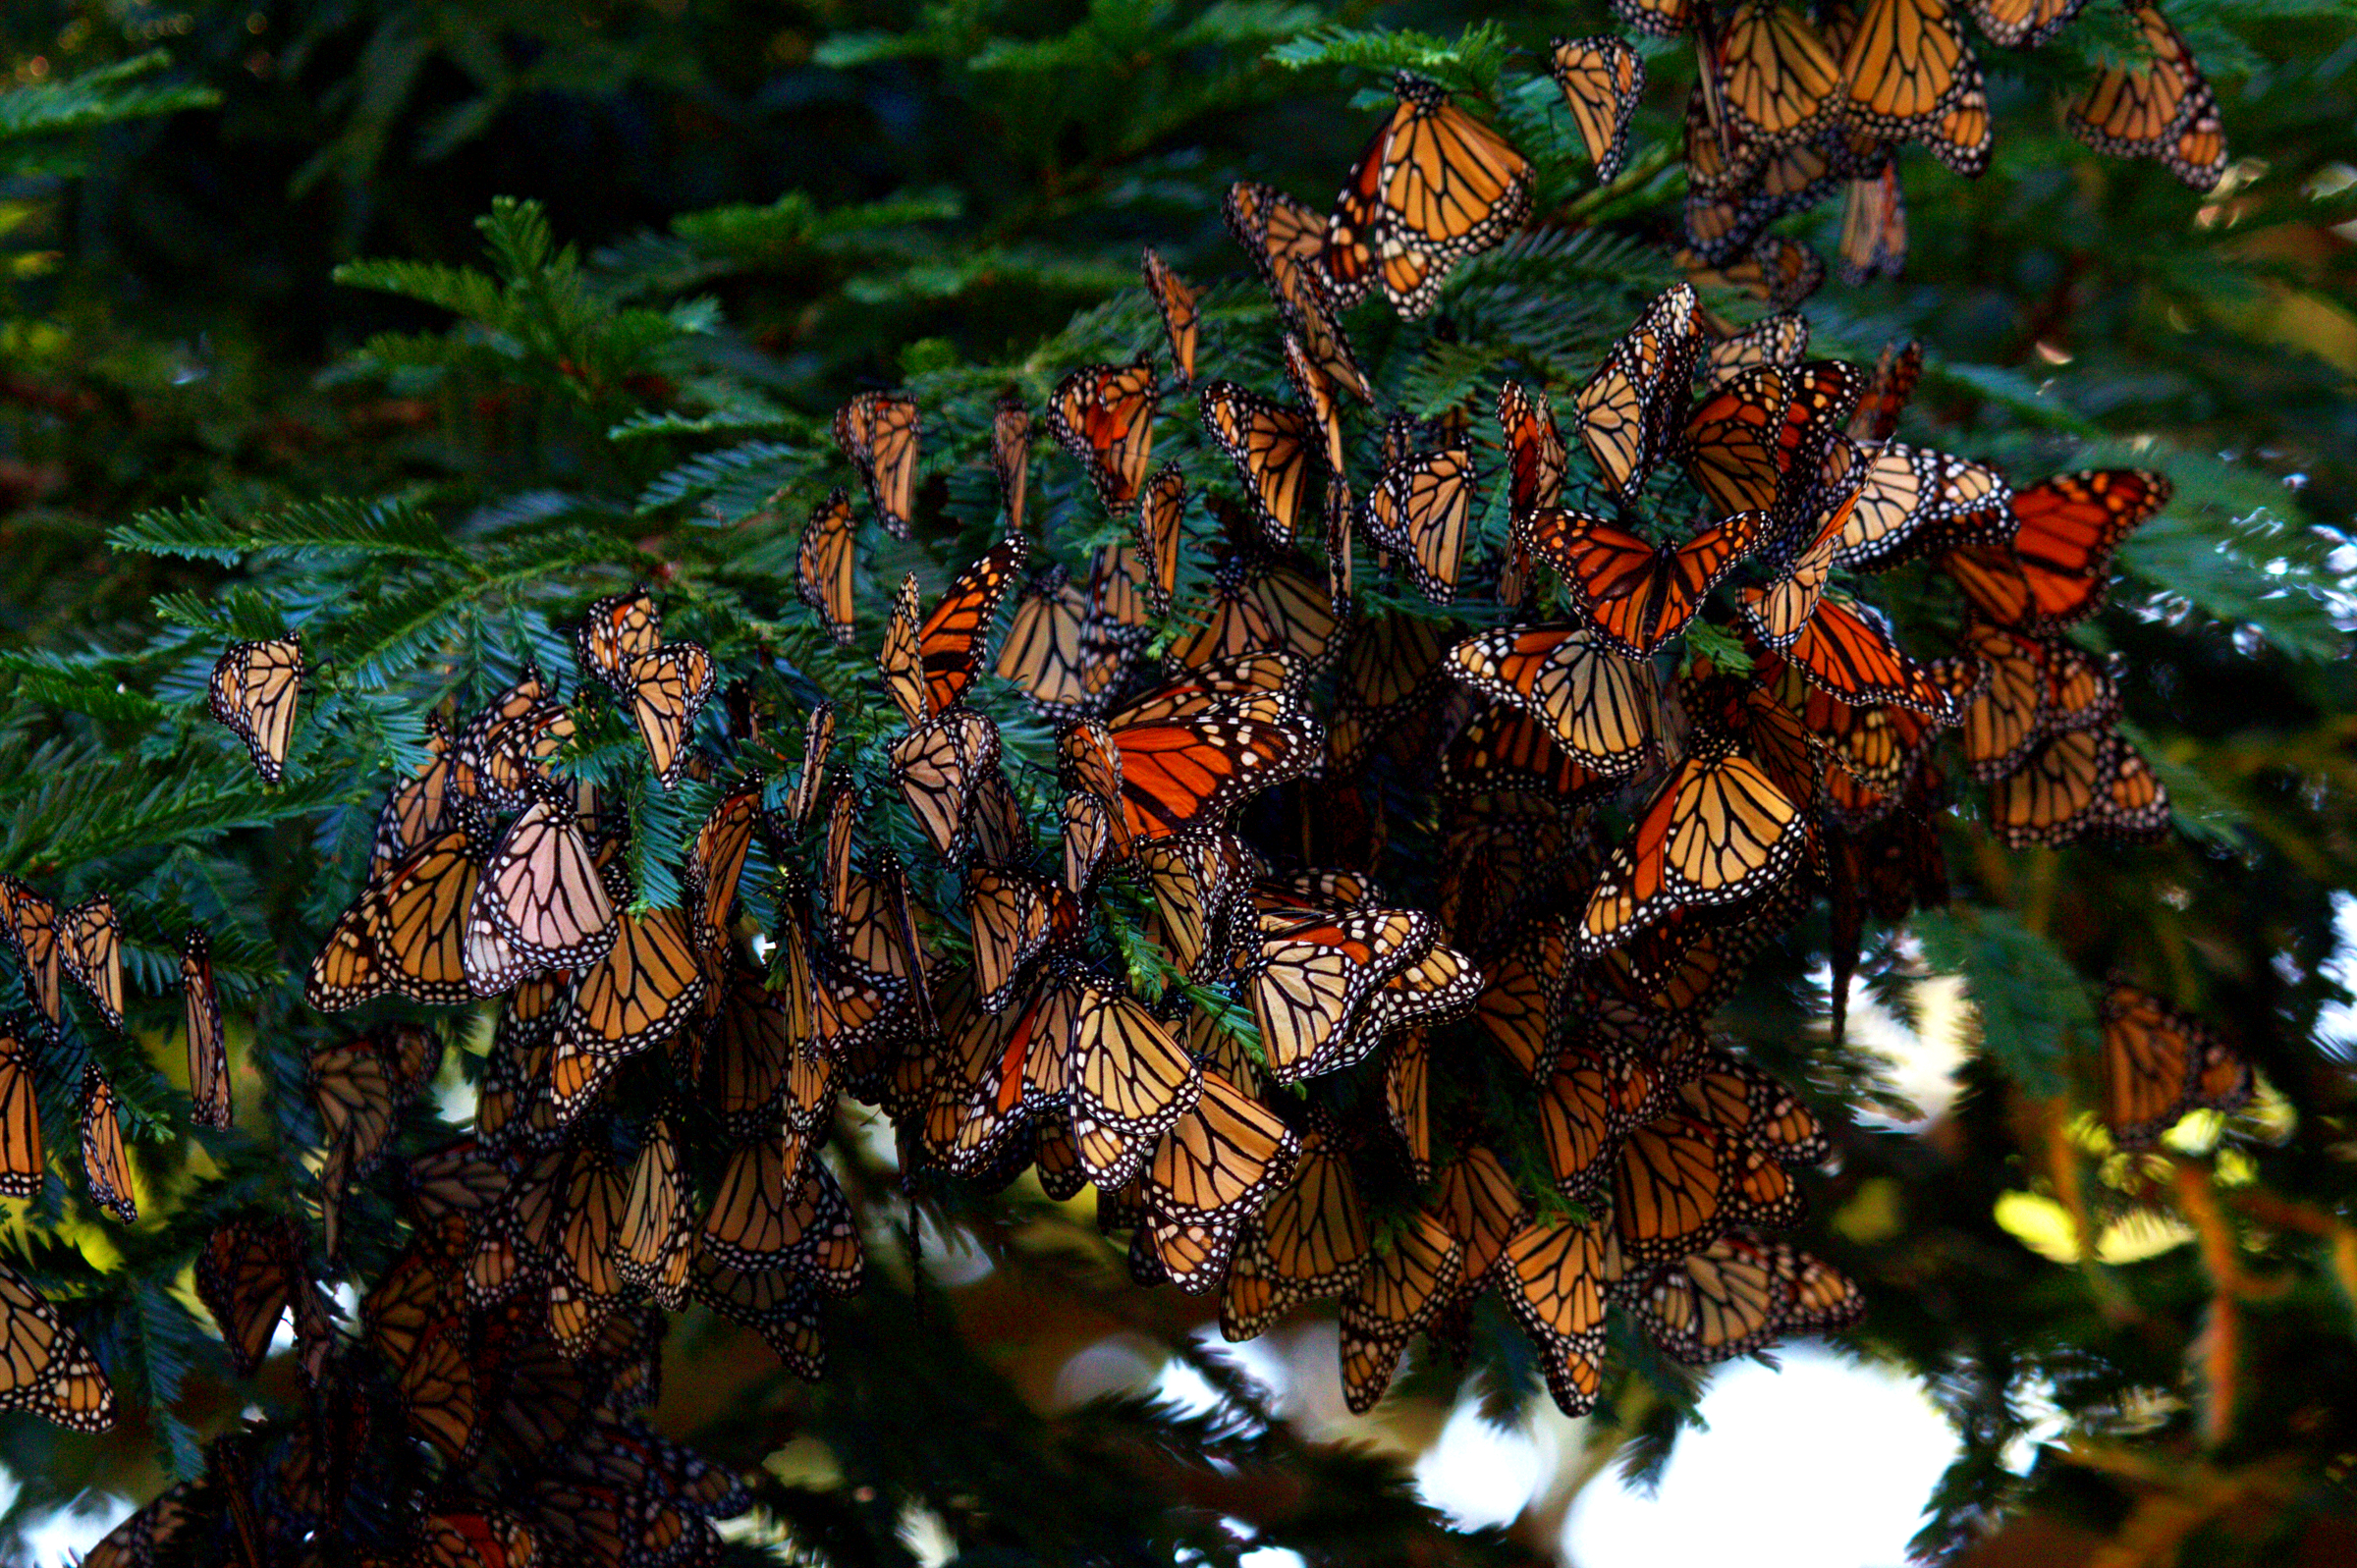 Staggering declines over the last few years have decimated the monarch butterfly in North America, especially the population that only recently was so abundant in the eastern United States, according to a new analysis by NatureServe and the Xerces Society. | Photo by Carly Voight/The Xerces Society